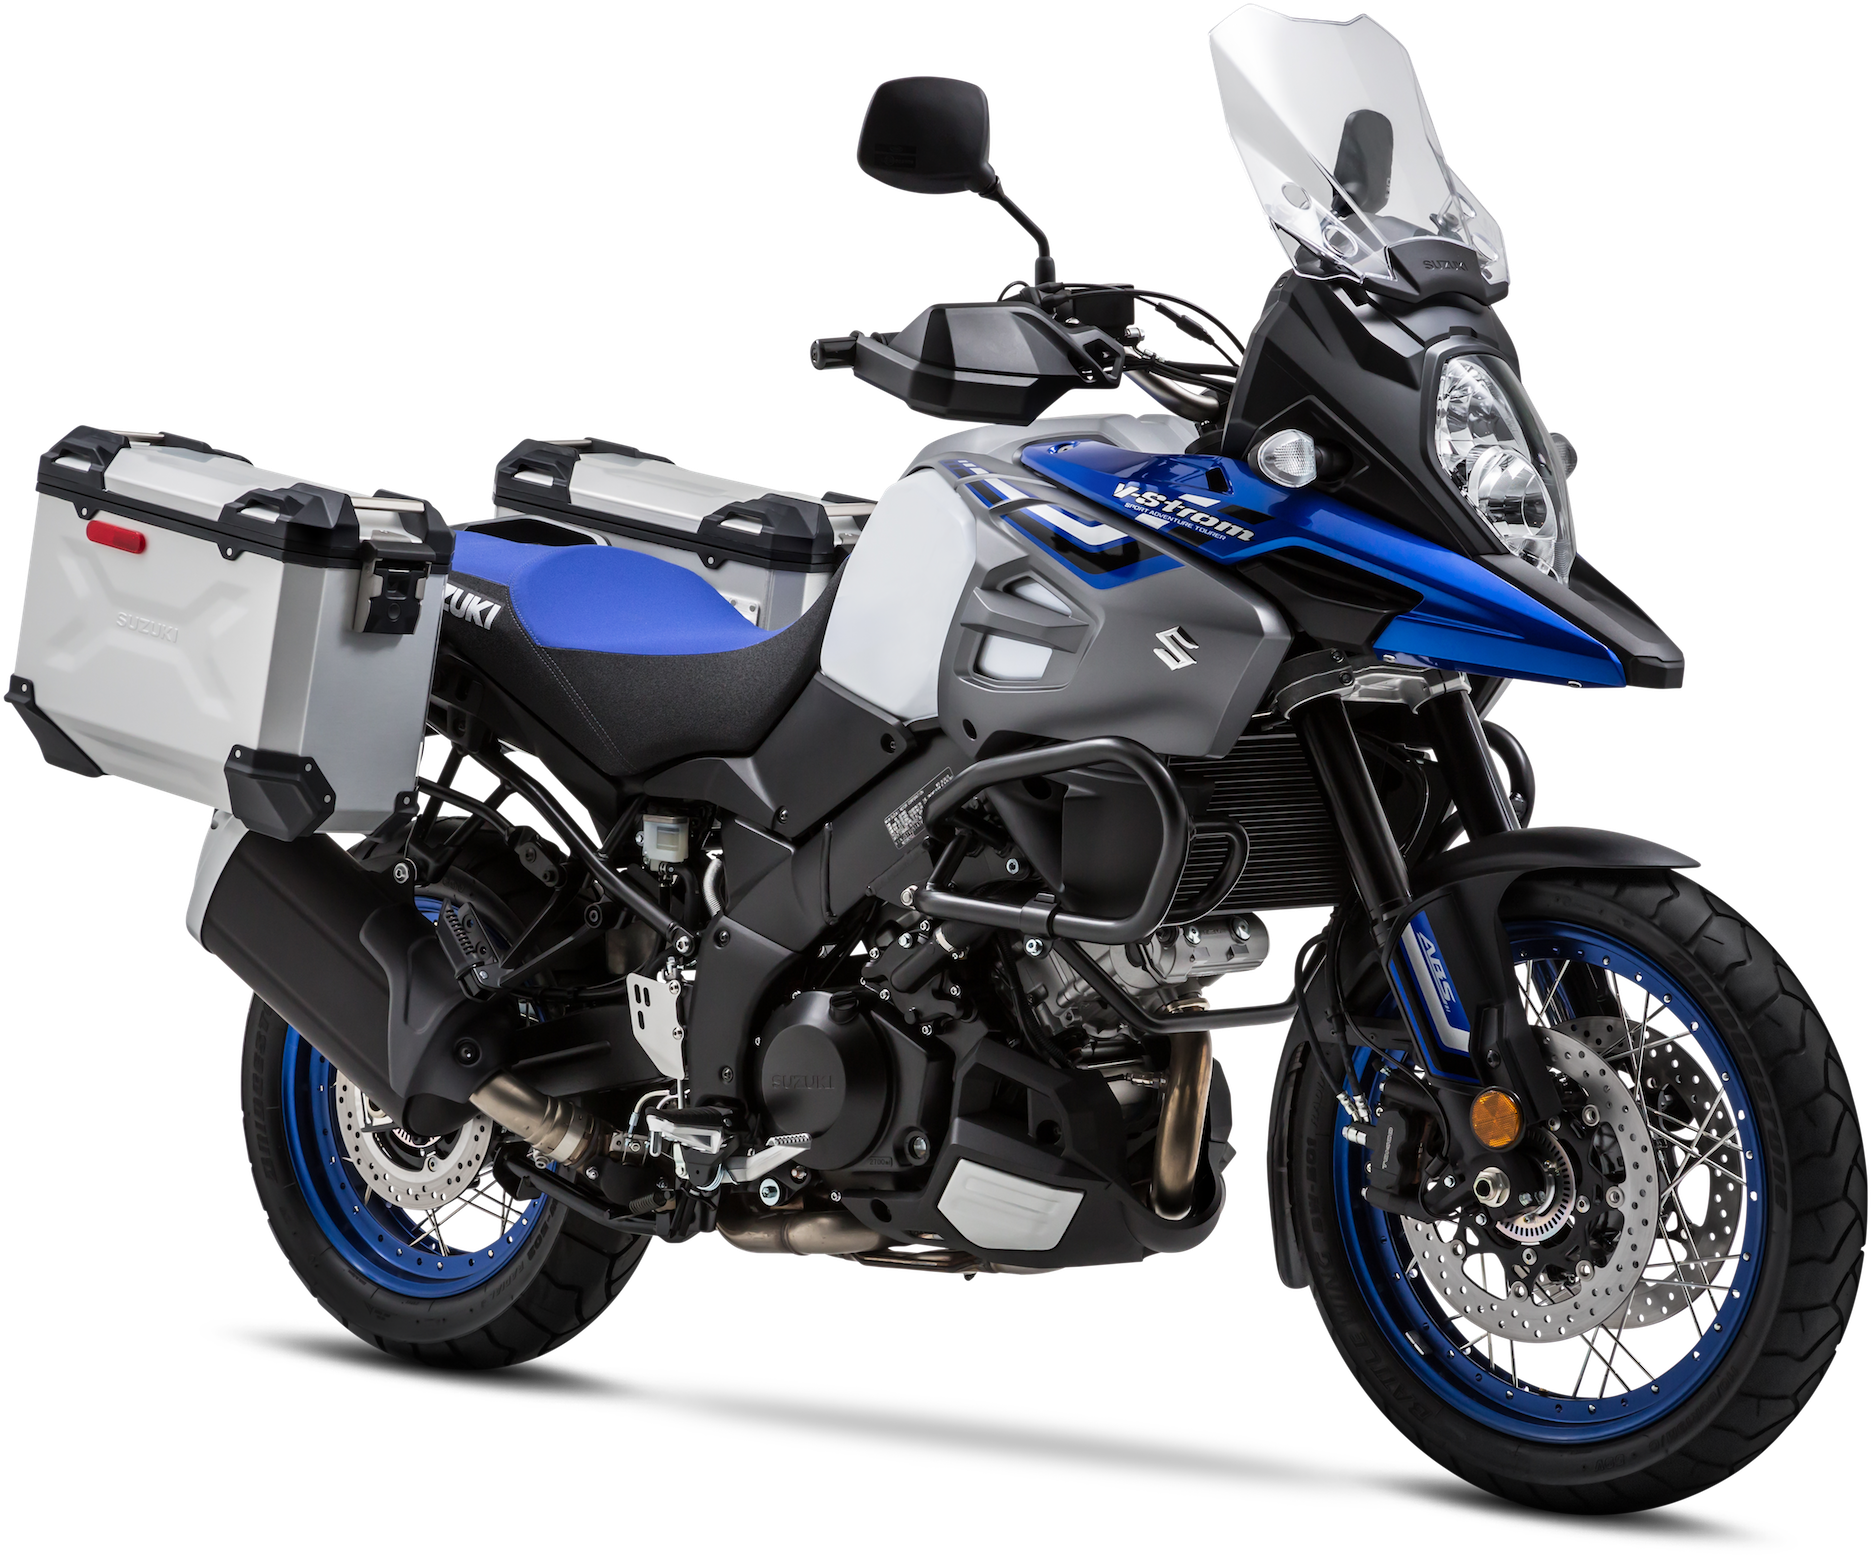 A Blue And White Motorcycle With A Black Background